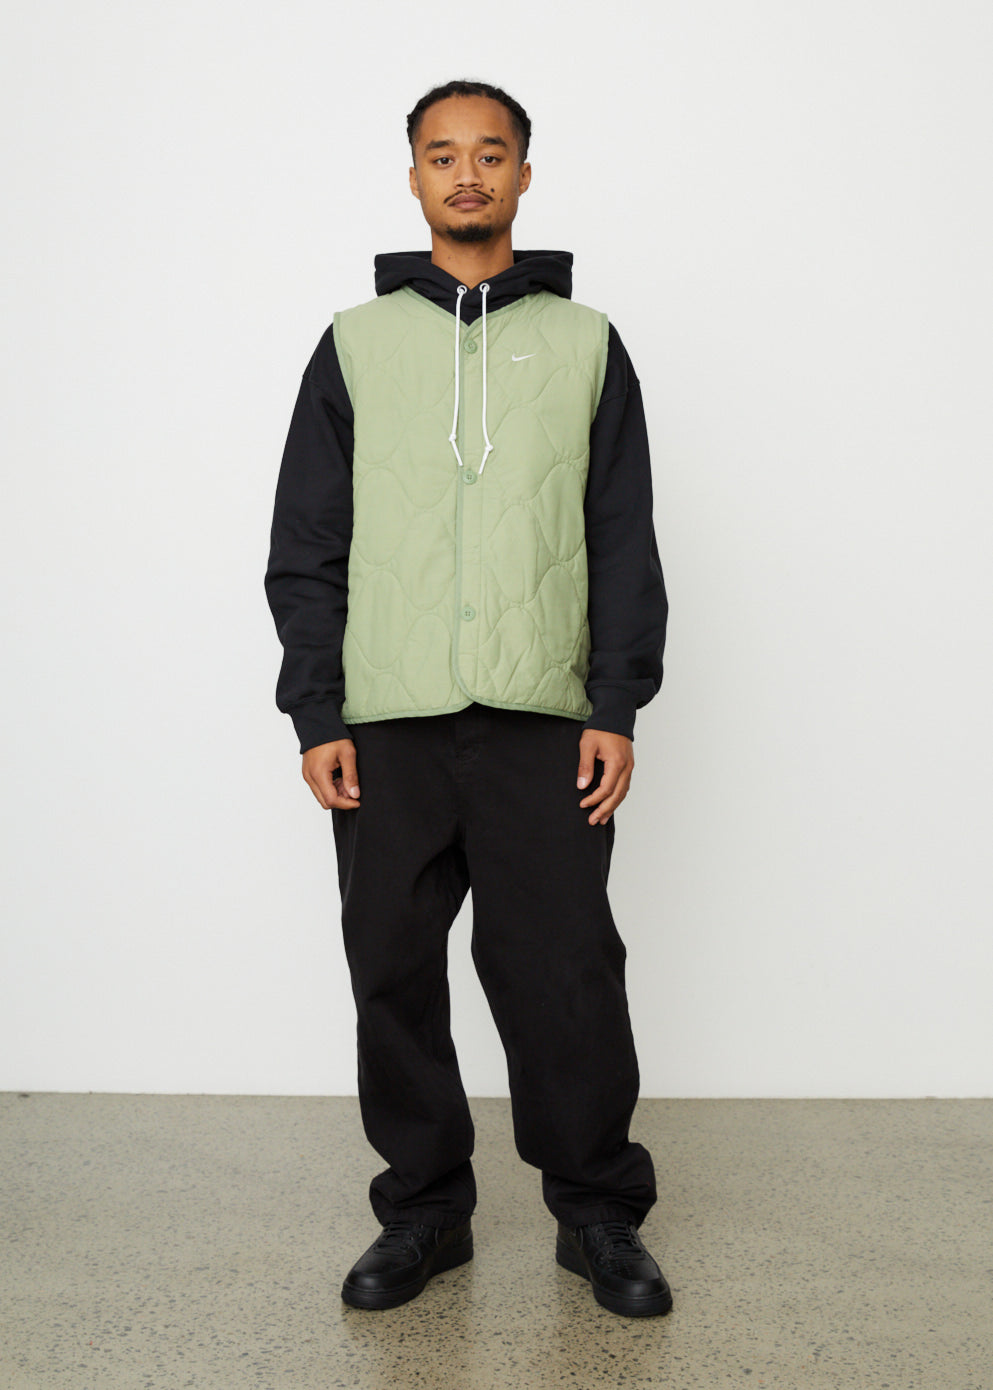 Nike Life Insulated Military Vest